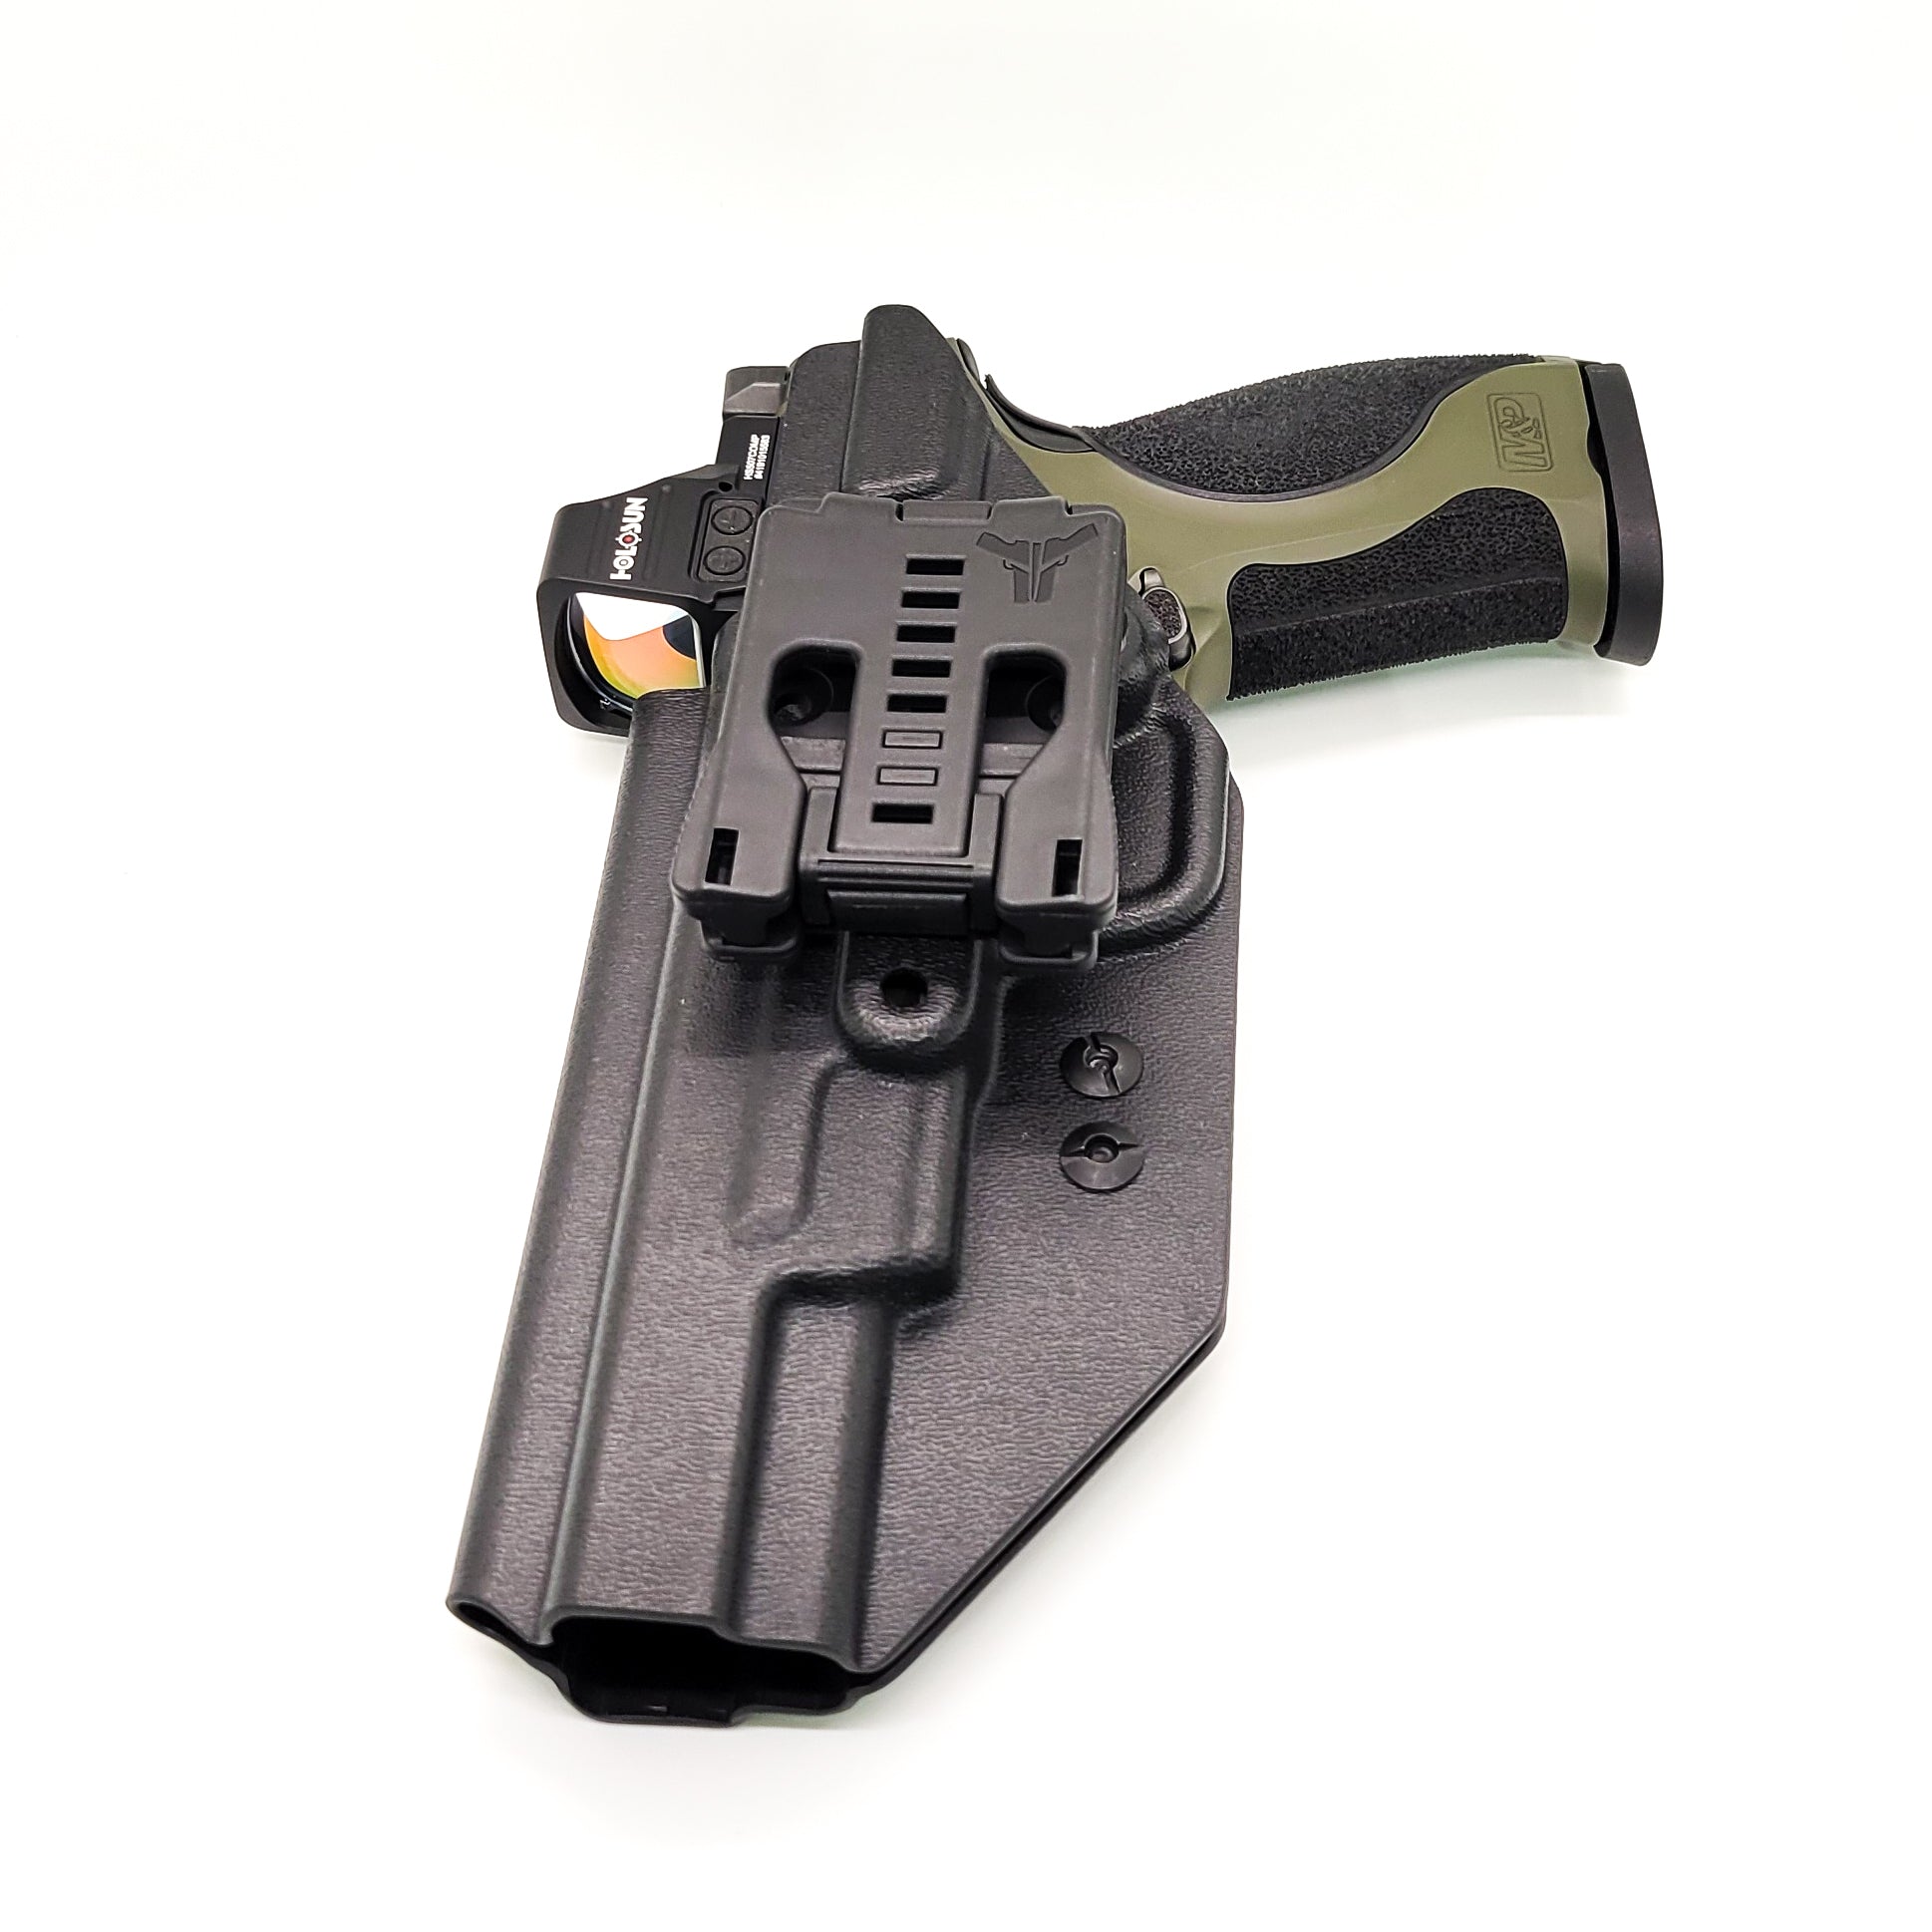 For the best OWB Outside Waistband Kydex Taco Style Holster designed to fit the Smith & Wesson 2023 SPEC Series M&P 9 Metal M2.0 9mm pistol shop Four Brothers Holsters. Full sweat guard, adjustable retention, profiled for a red dot sight. Proudly made in the USA.